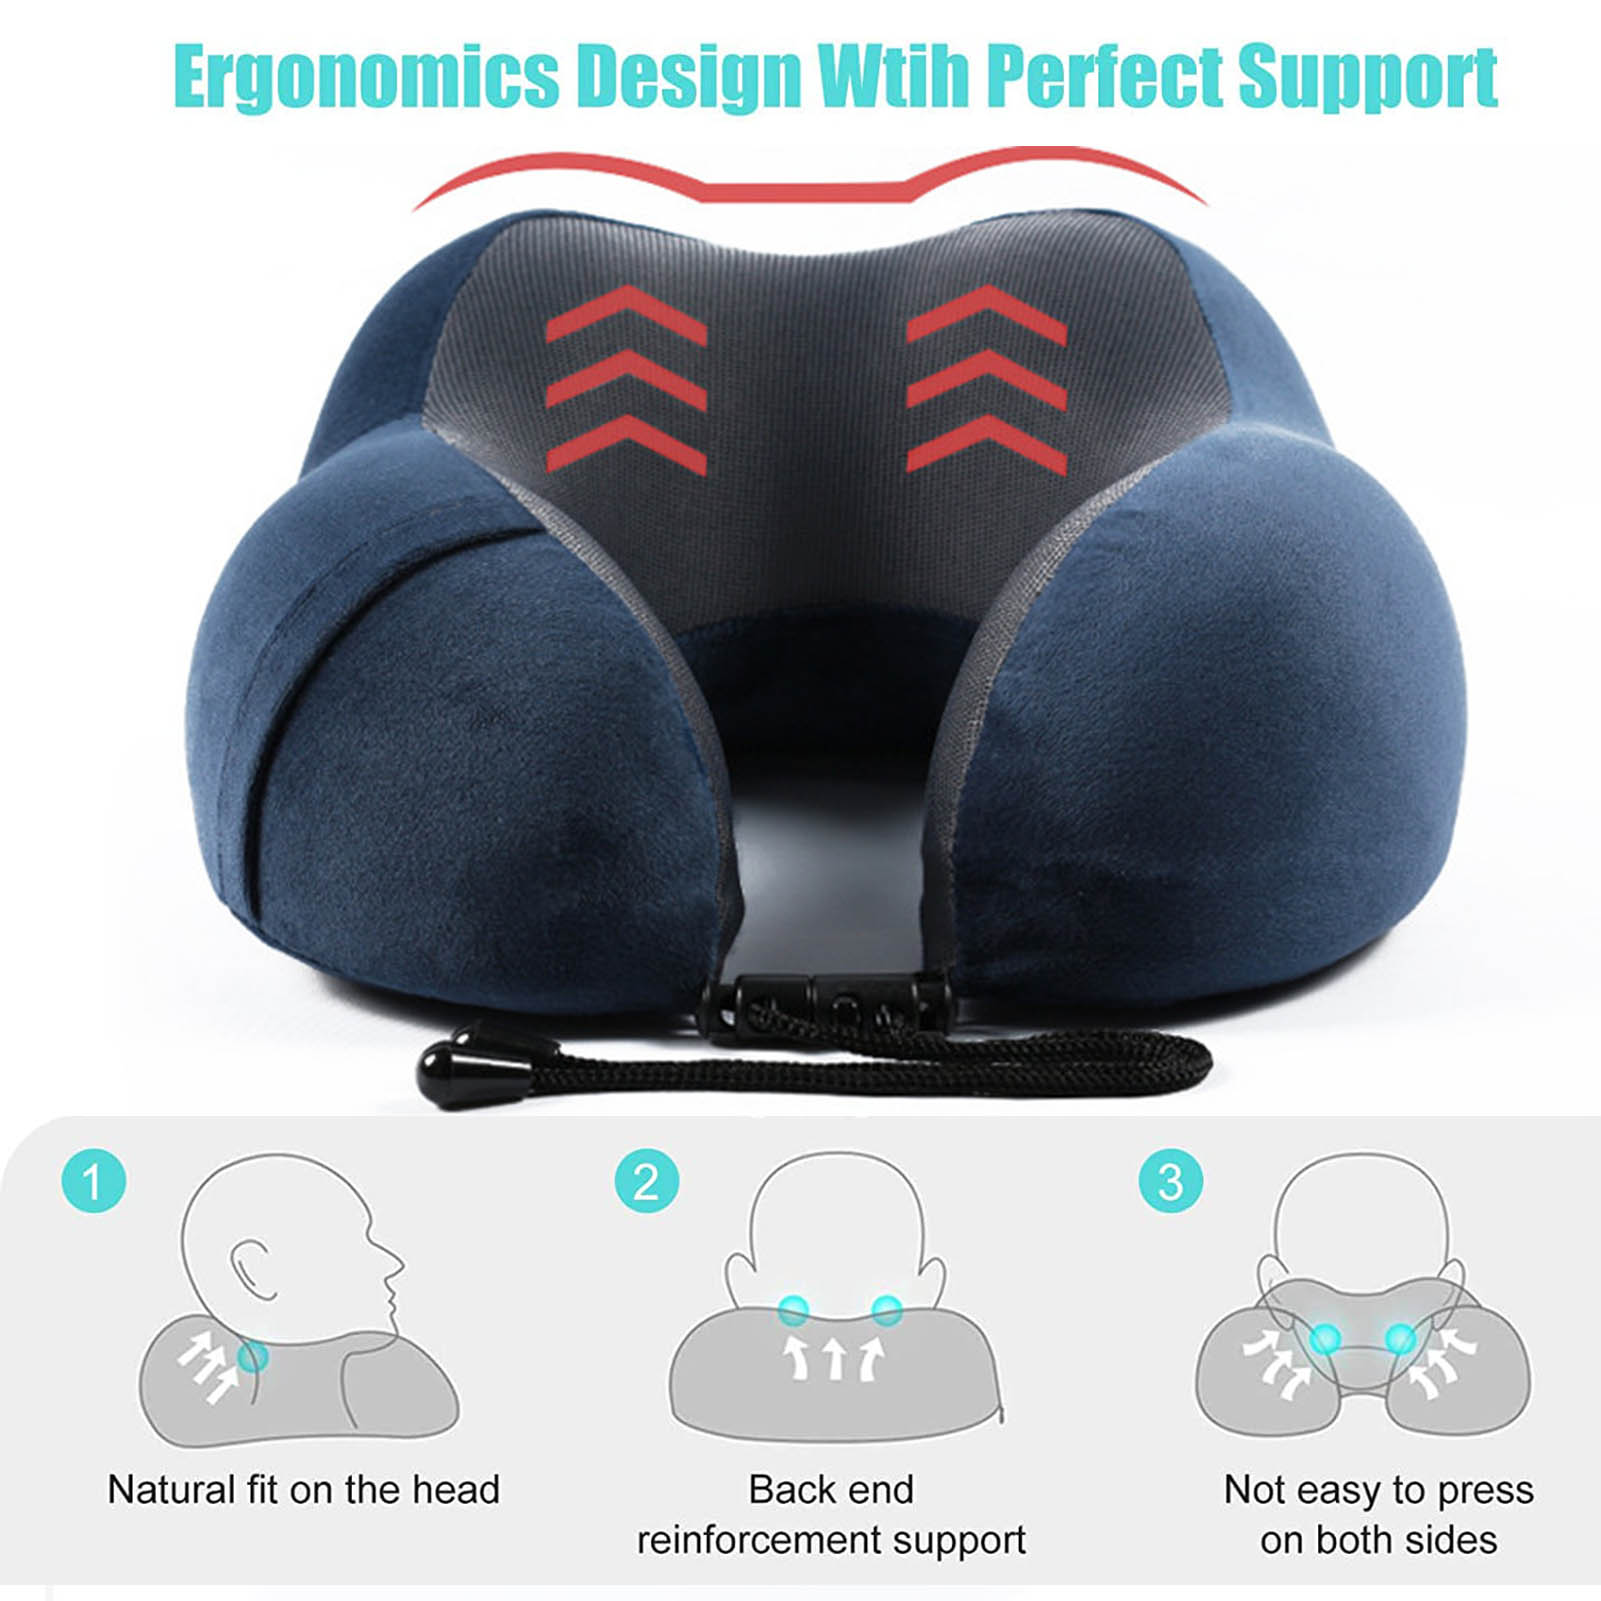 Travel Pillow Luxury Memory Foam Neck & Head Support Pillow Soft Sleeping Rest Cushion for Airplane Car & Home Best Gift (Navy Blue) - image 2 of 7